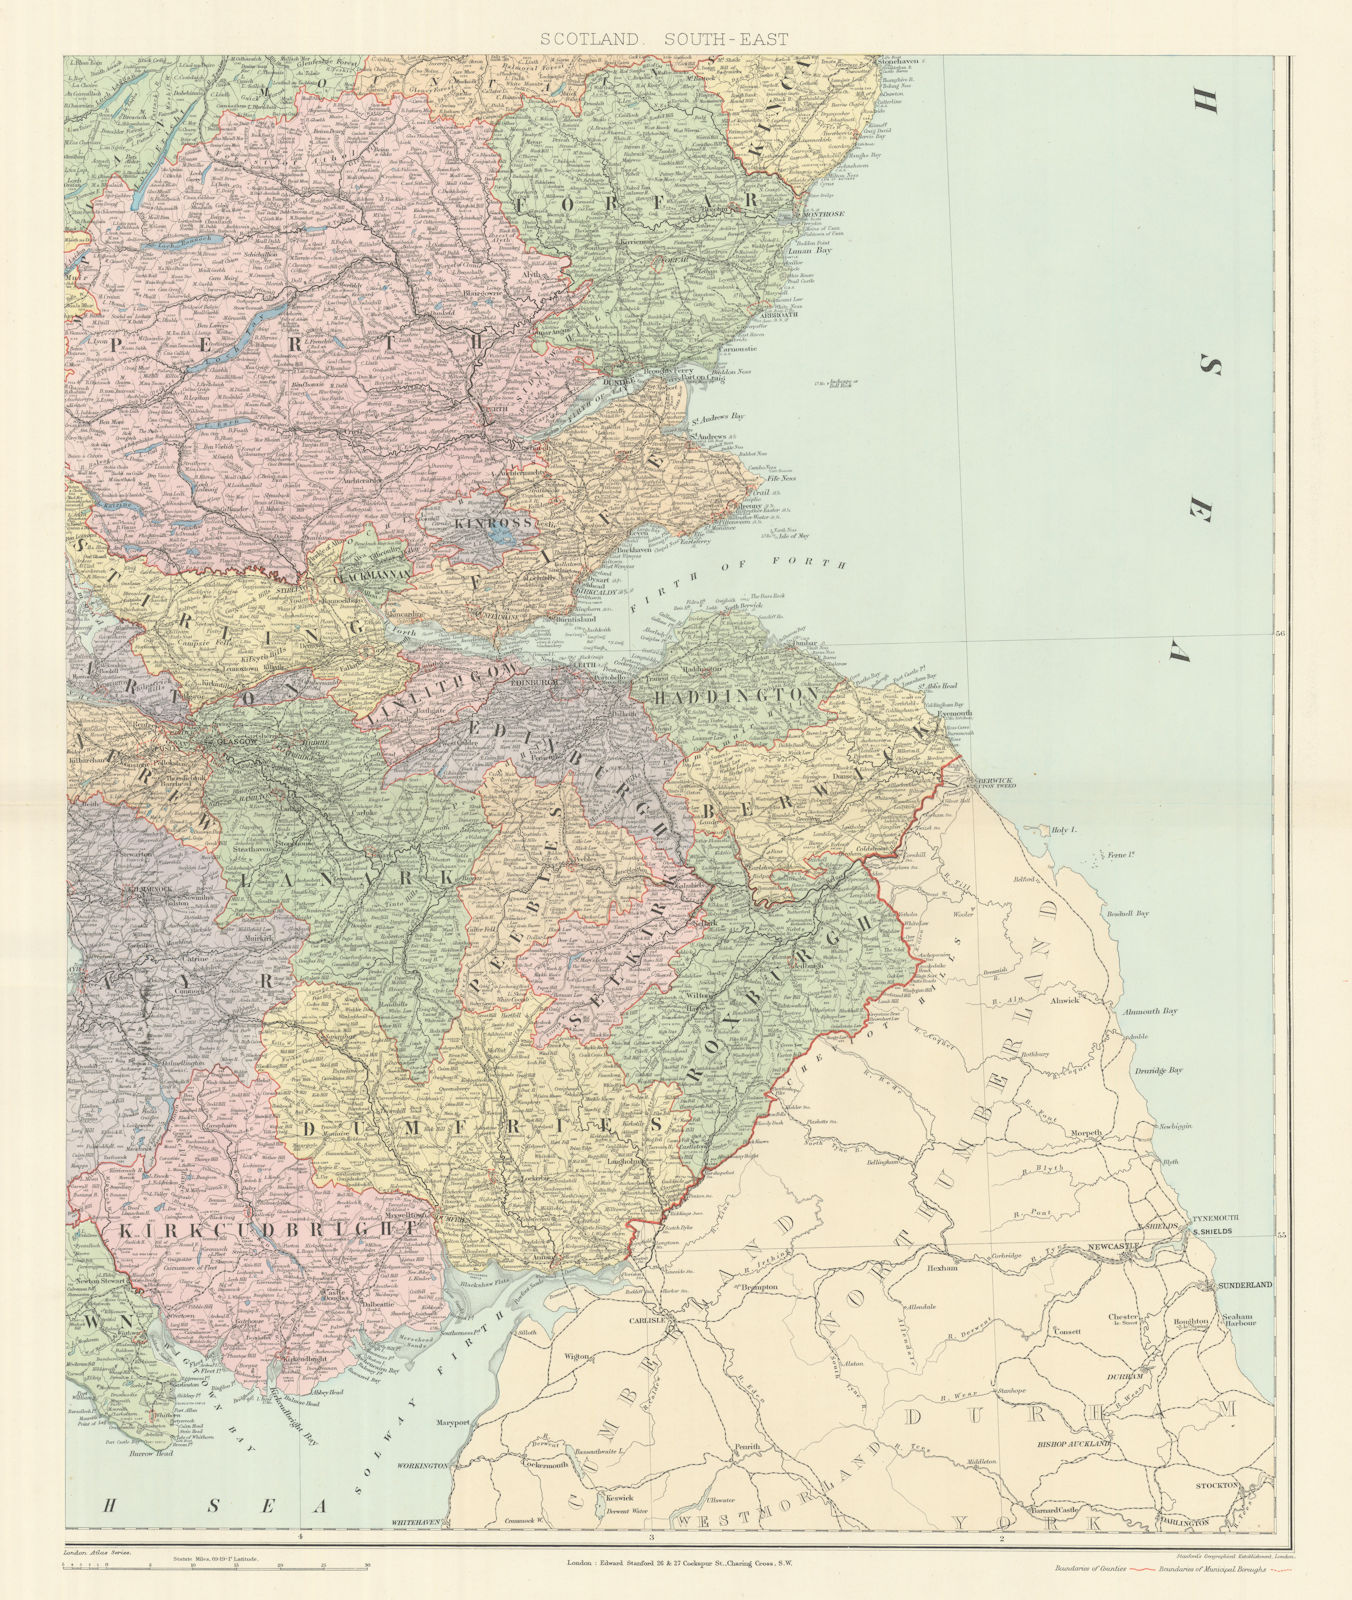 Associate Product Scotland S.E. Borders Central Firth of Forth Perth. 61x50cm. STANFORD 1894 map